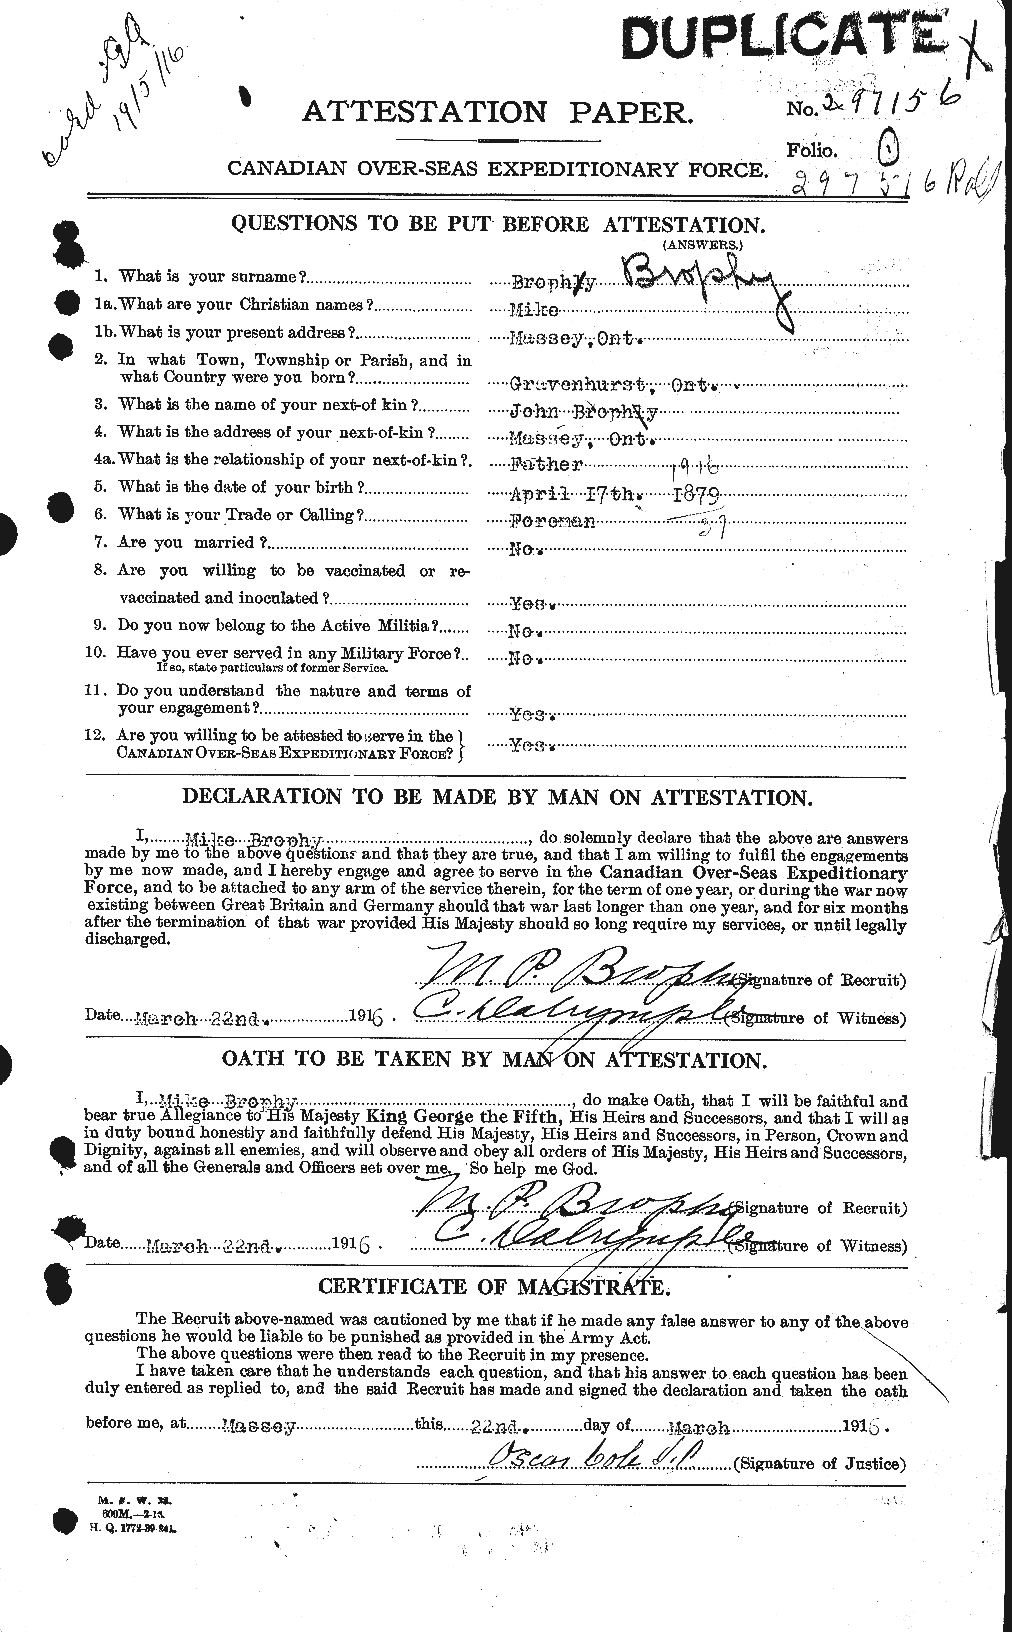 Personnel Records of the First World War - CEF 264875a